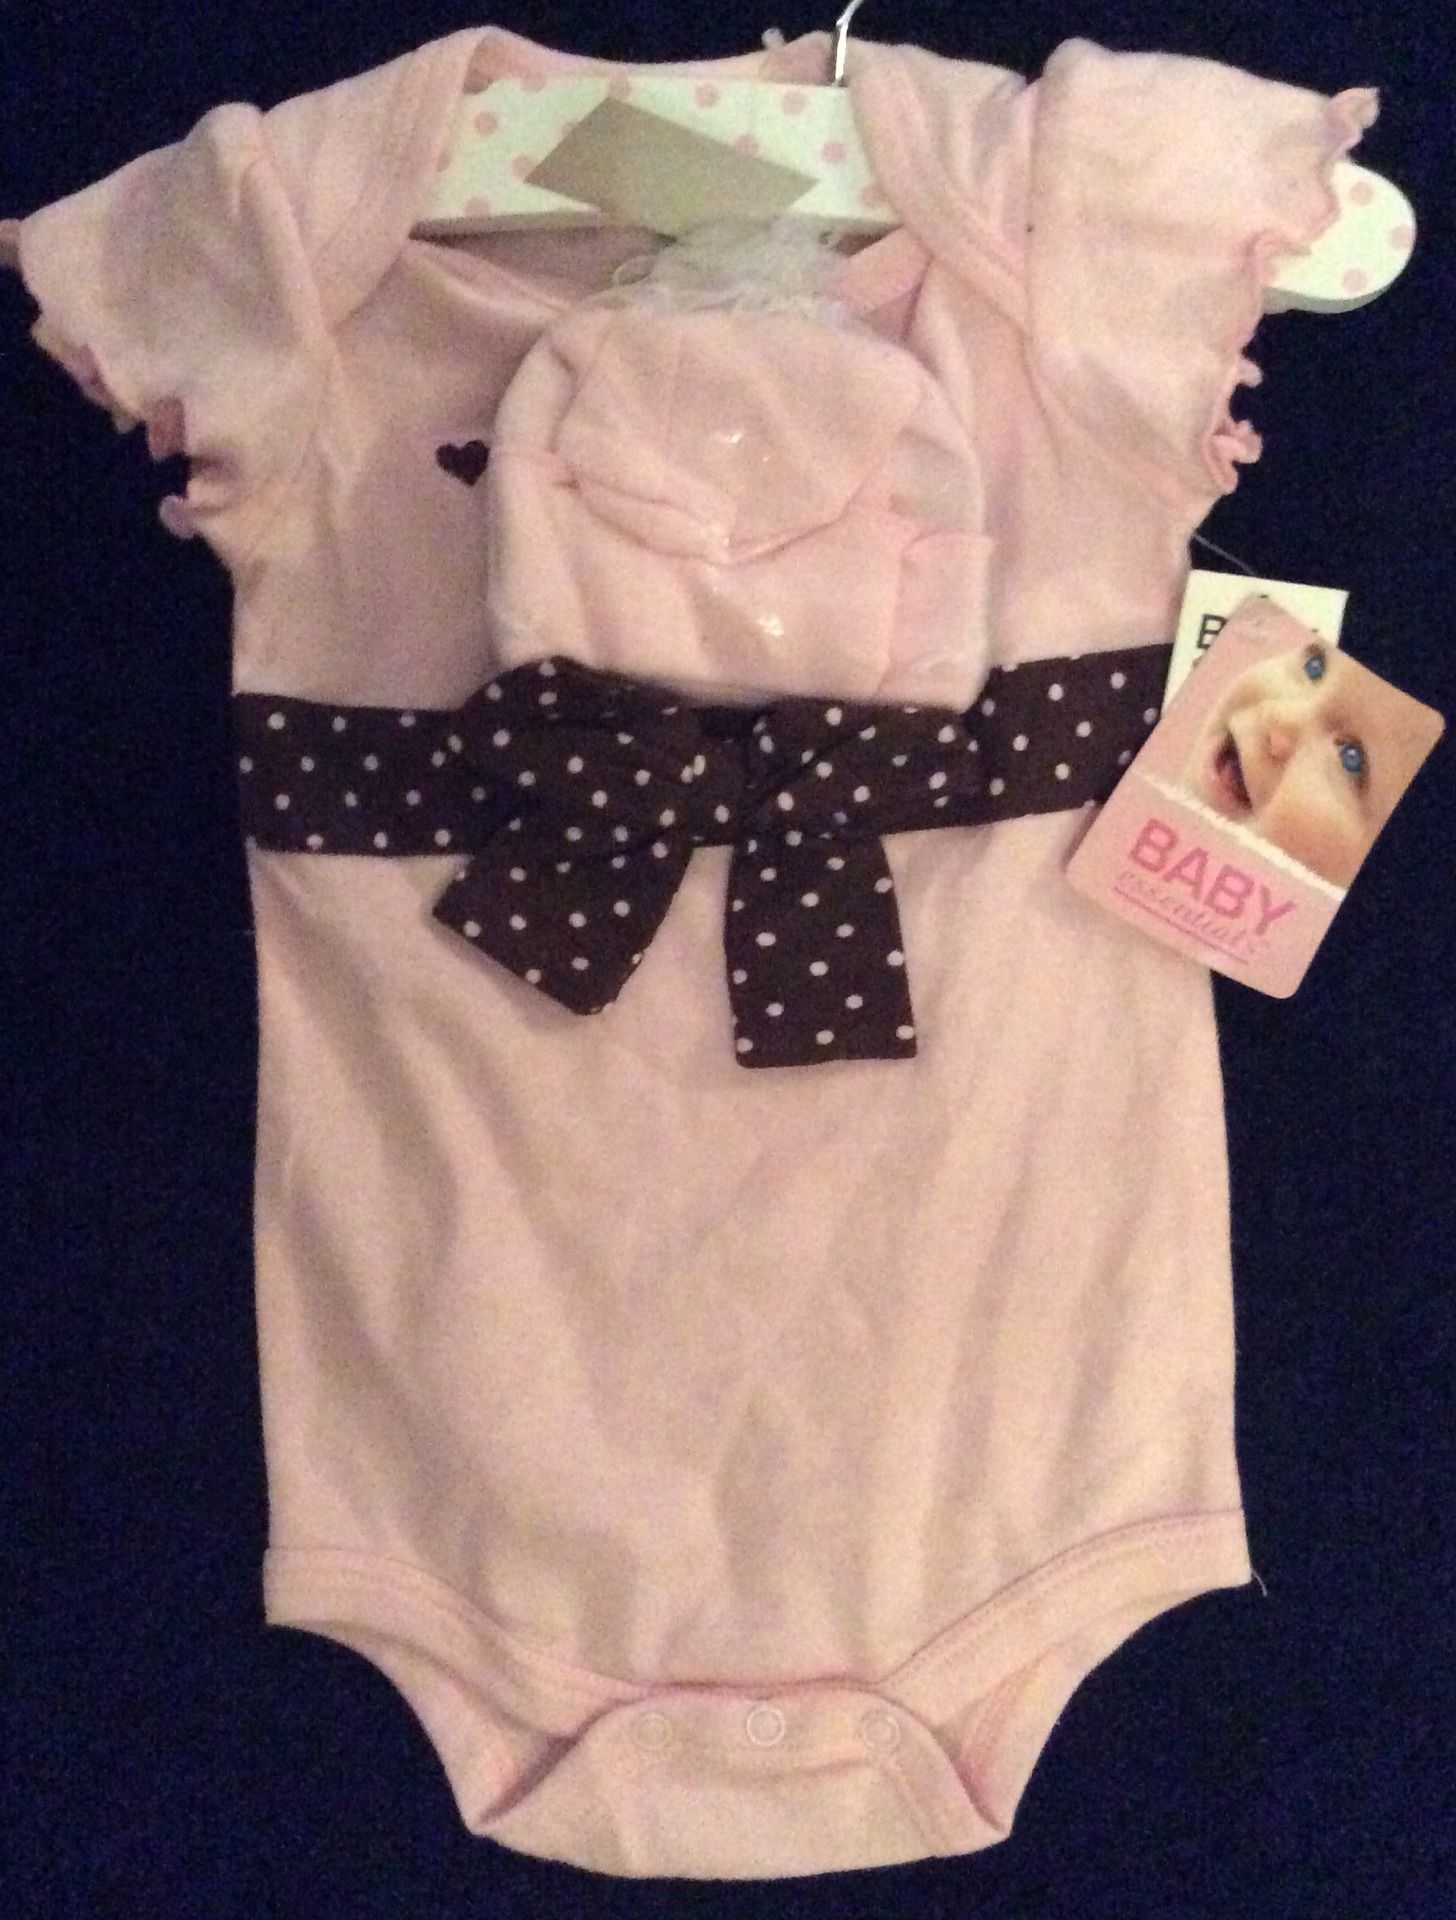 New onesie and hat-size 6 months